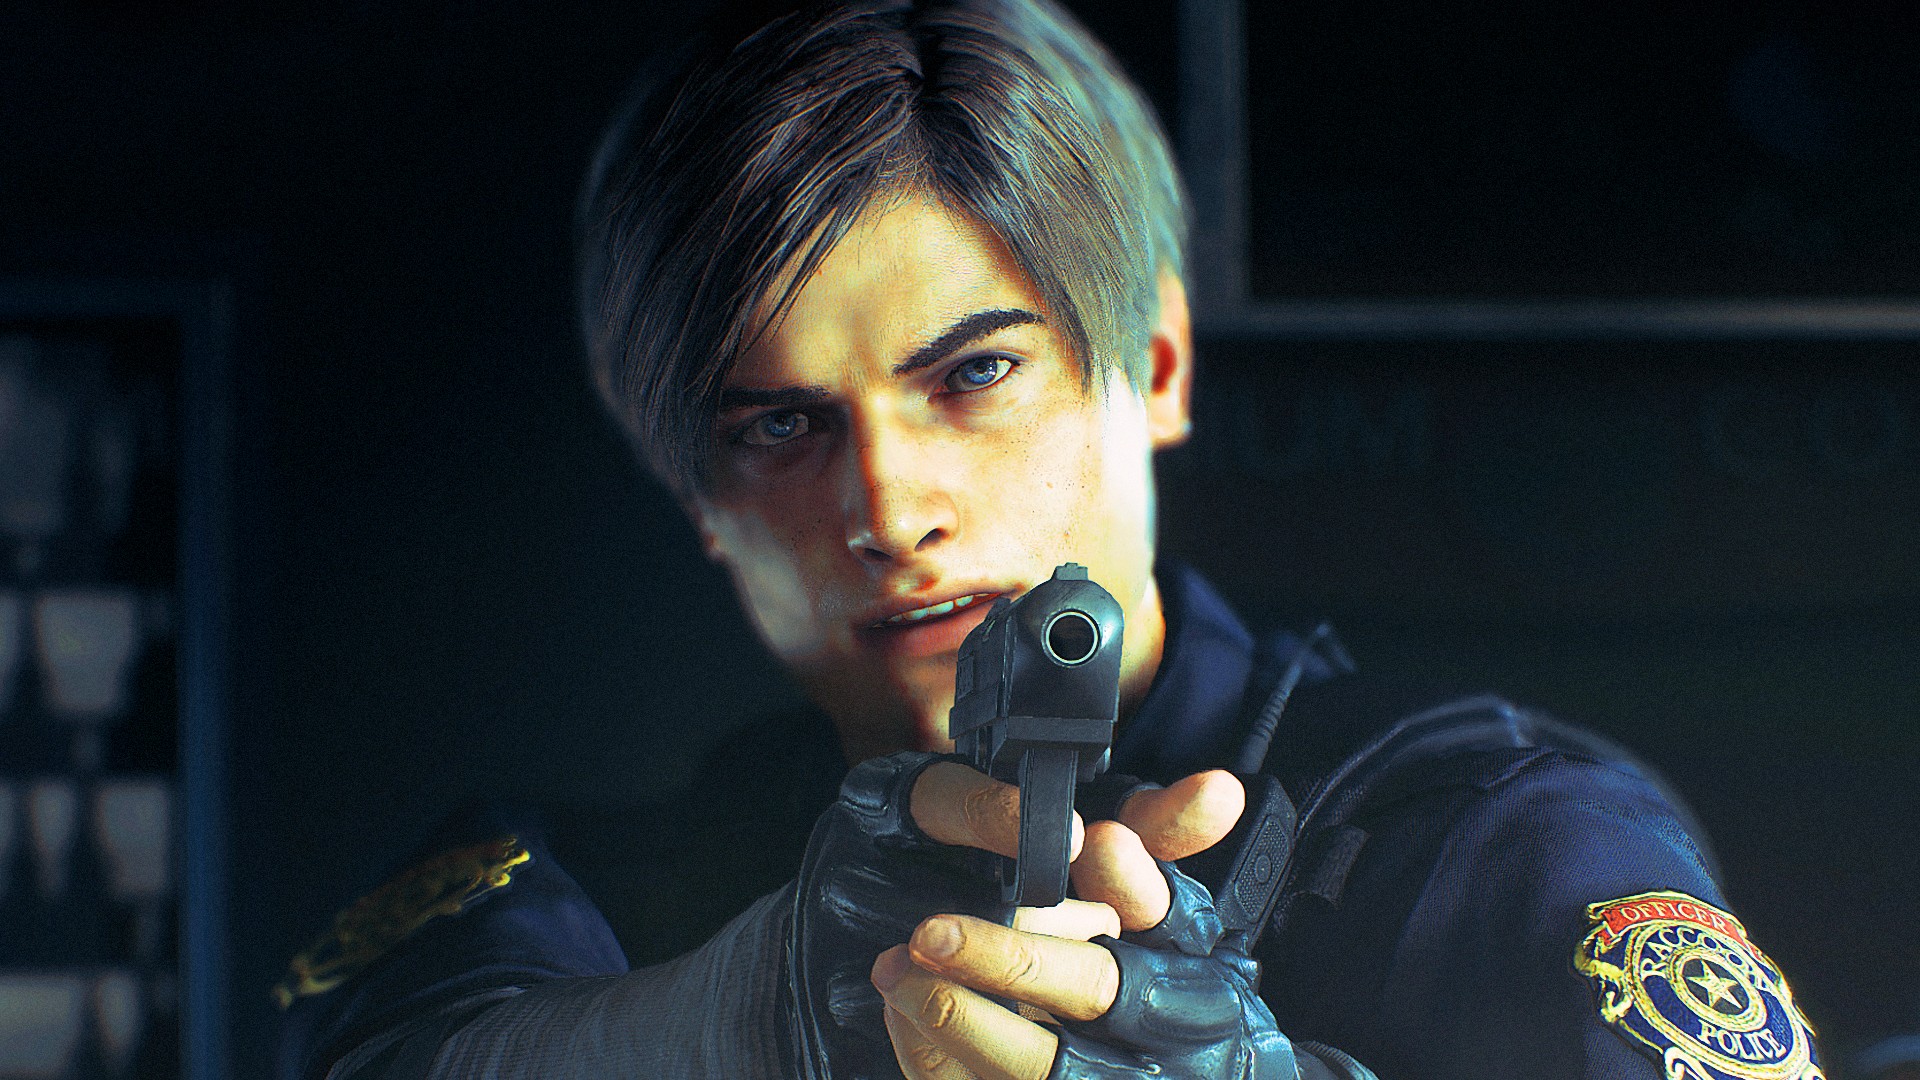 Resident Evil 2 ray tracing is finally good thanks to this mod